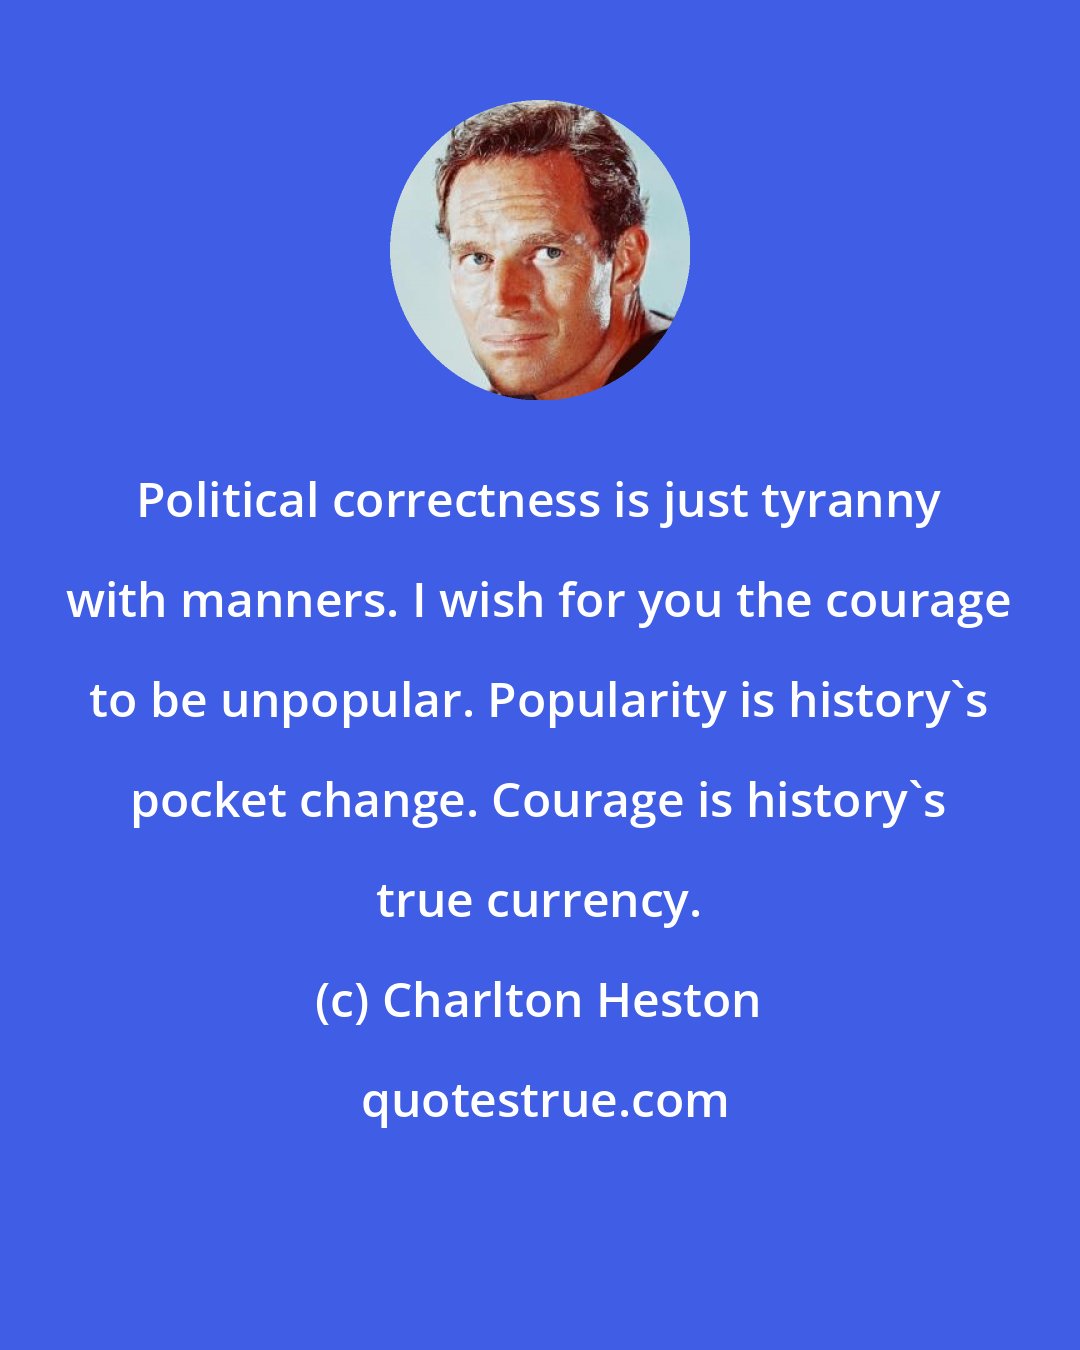 Charlton Heston: Political correctness is just tyranny with manners. I wish for you the courage to be unpopular. Popularity is history's pocket change. Courage is history's true currency.